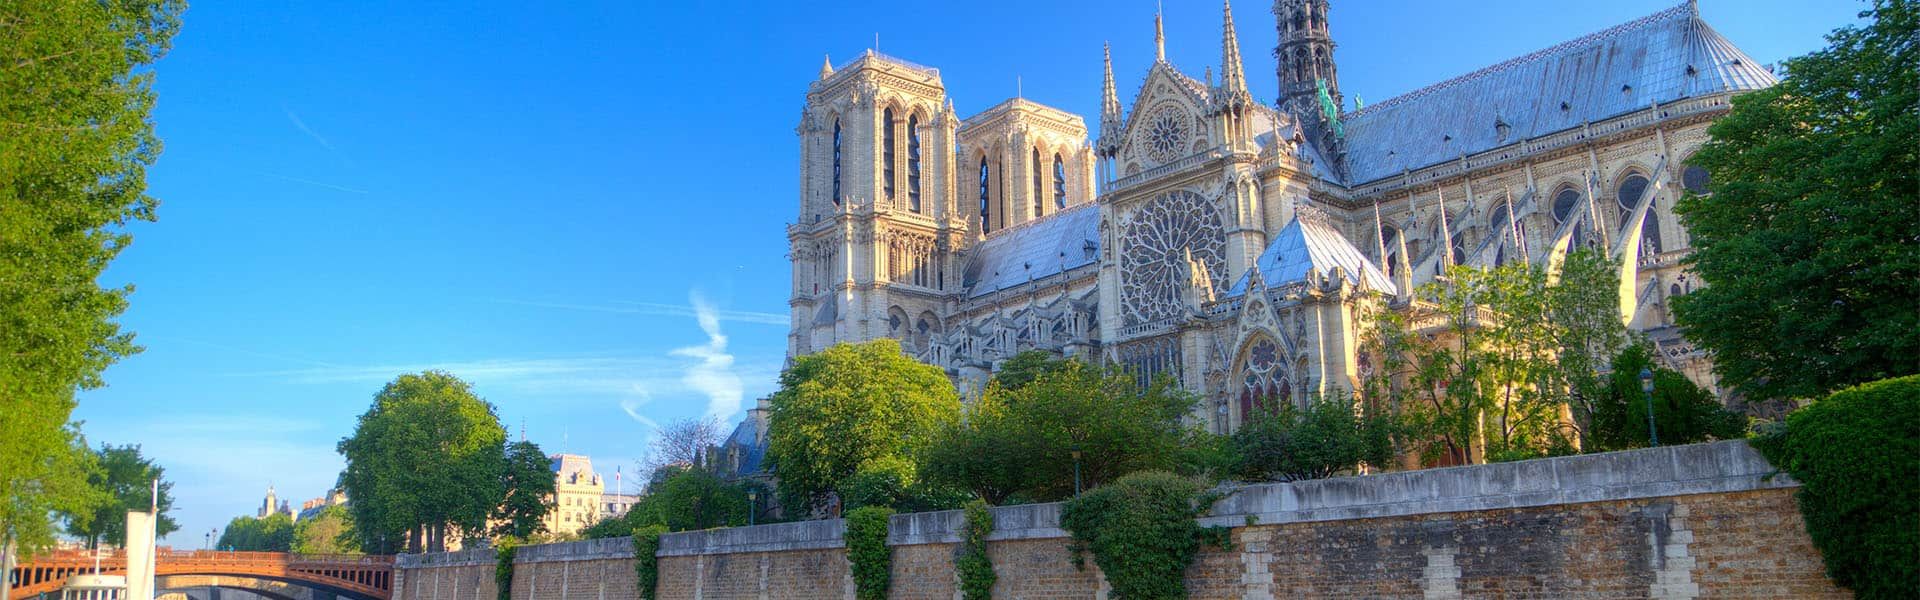 Notre Dame Cathedral, Paris, France, Europe for cruisetour